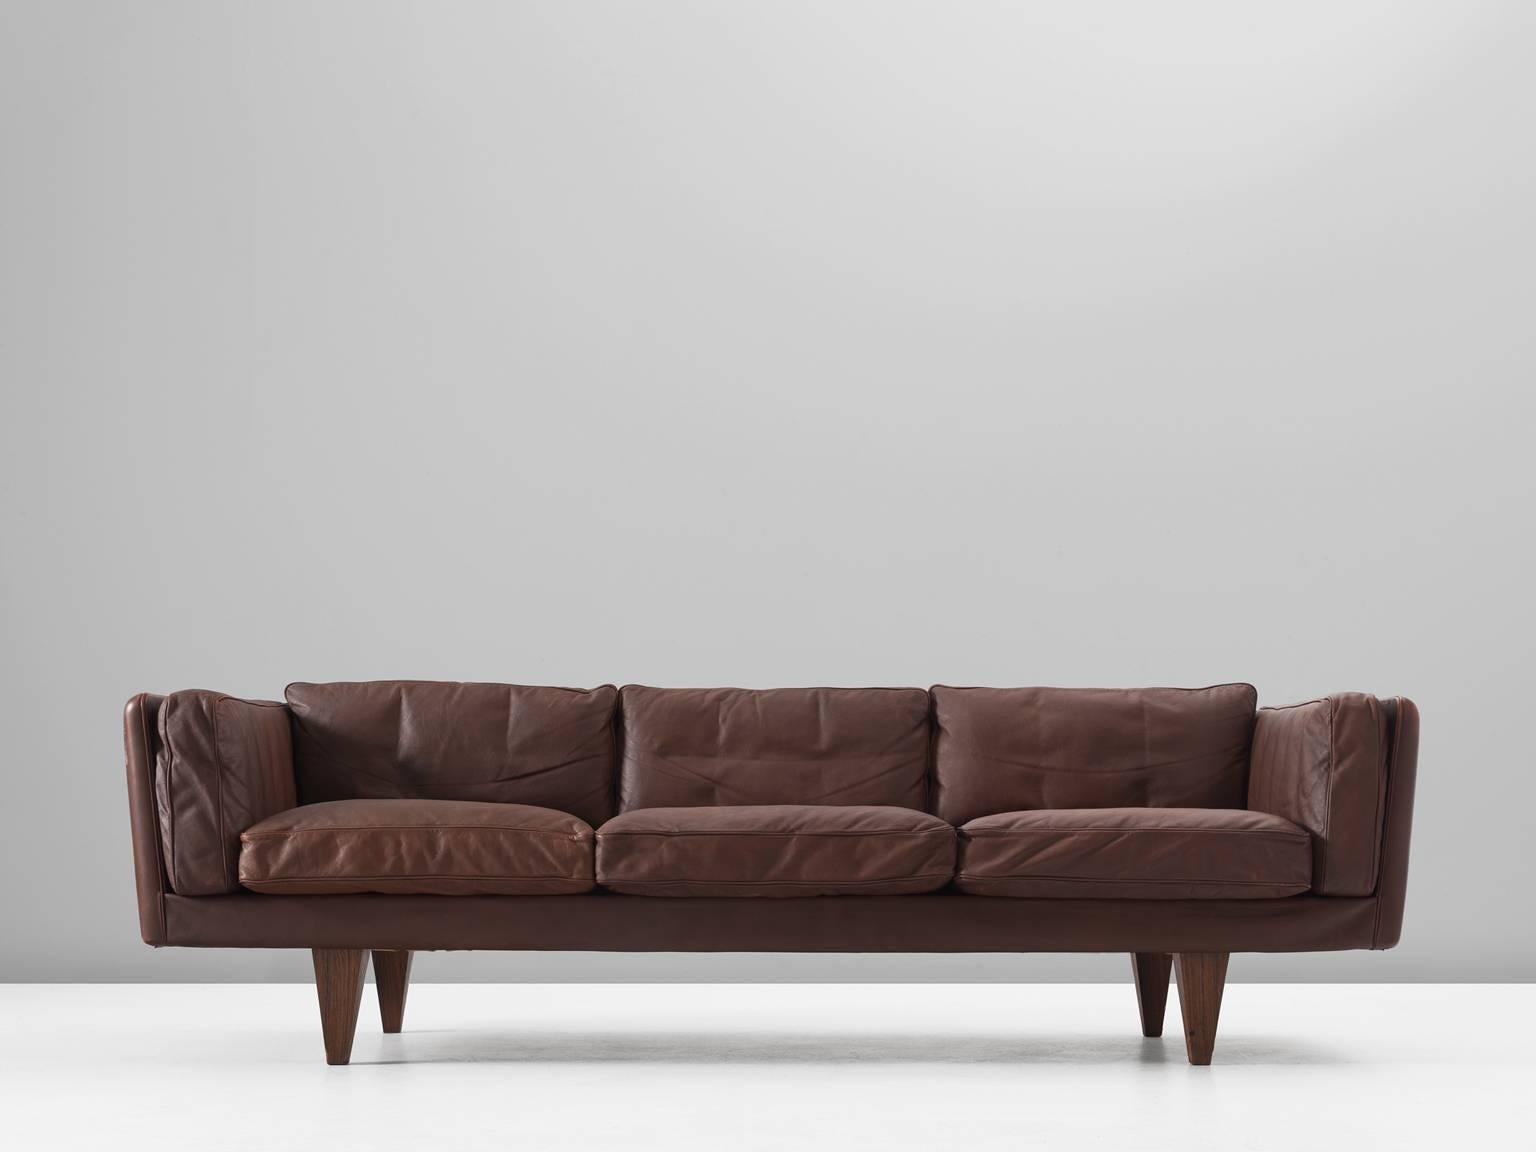 Sofa model V11 in leather and rosewood by Illum Wikkelso, Denmark 1960s. 

Stunningly three-seat sofa, designed by Danish designer Illum Wikkelsø. Highly comfortable and beautiful designed sofa with original upholstery. The brown high-quality